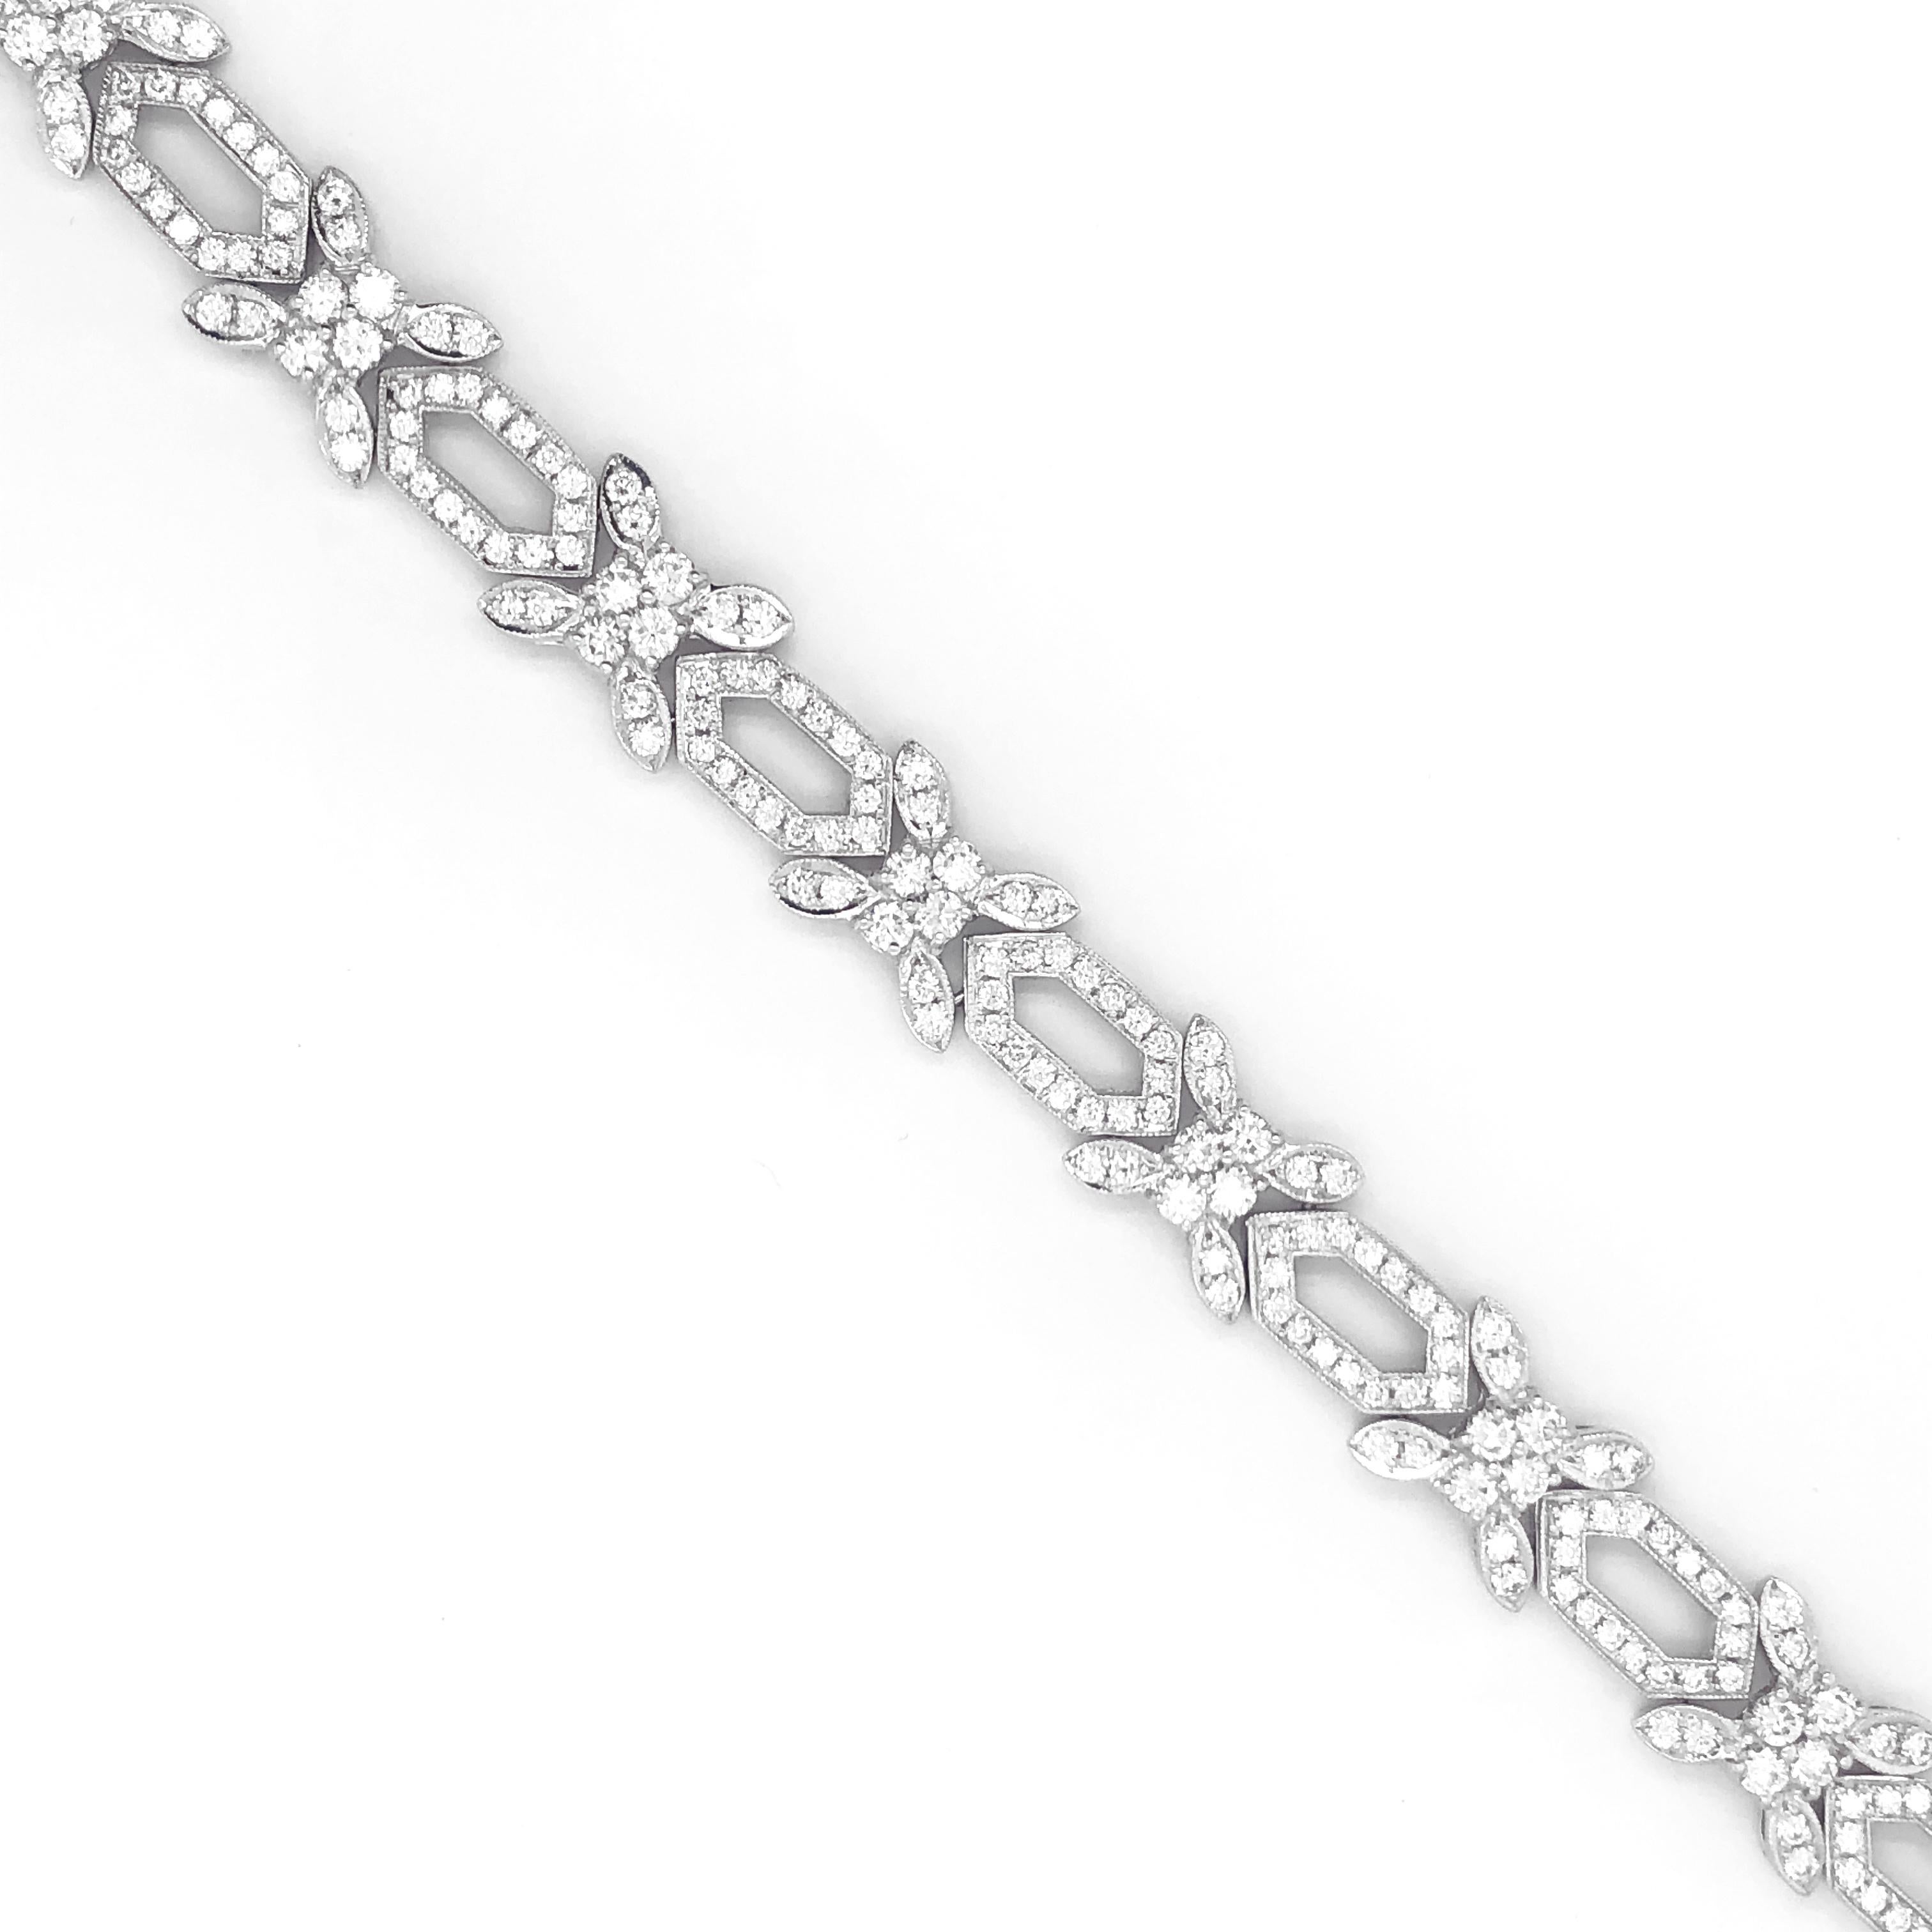 Slim vintage / retro inspired platinum bracelet.
Adorned with round natural white diamonds 8.31 ct.
Diamonds in G-H color clarity VS.
Length: 18.5 cm
Width: 1.3 cm
Weight: 39 g 